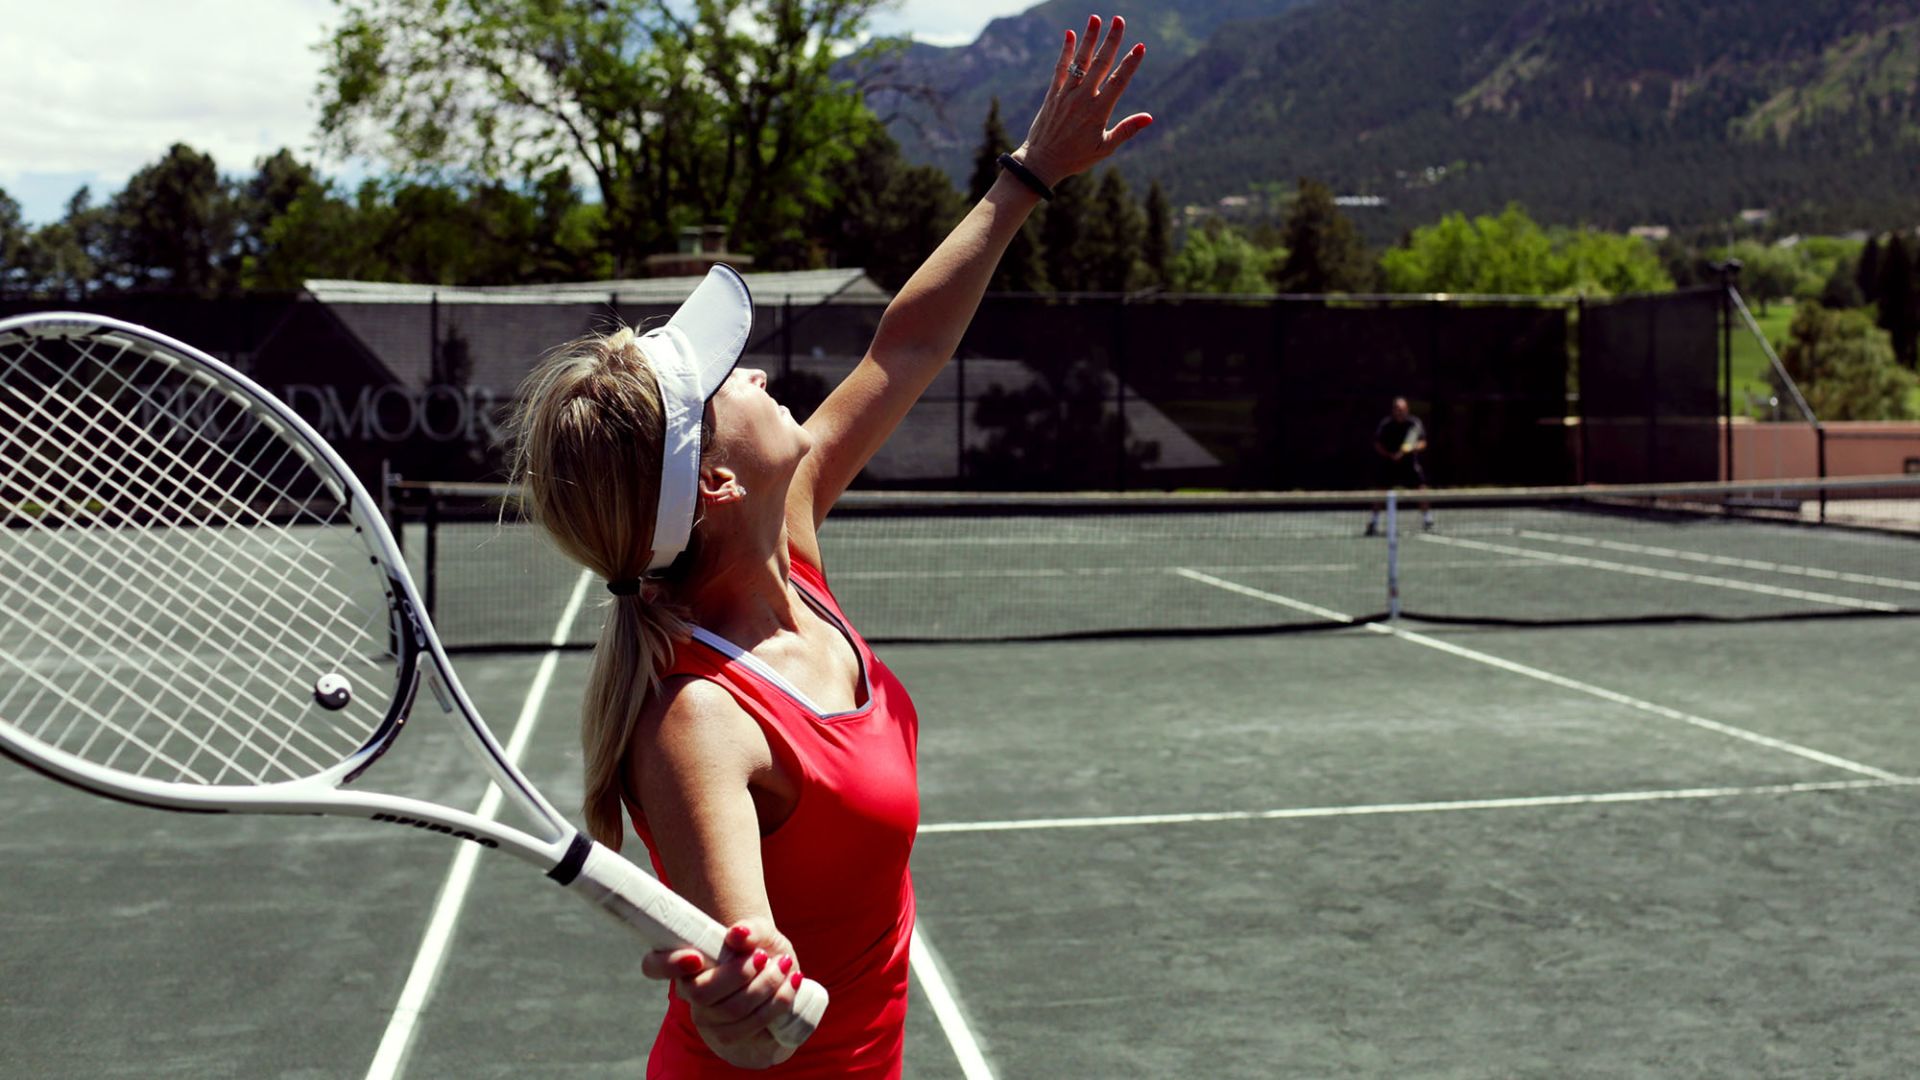 A Woman Holding A Racket On A Court